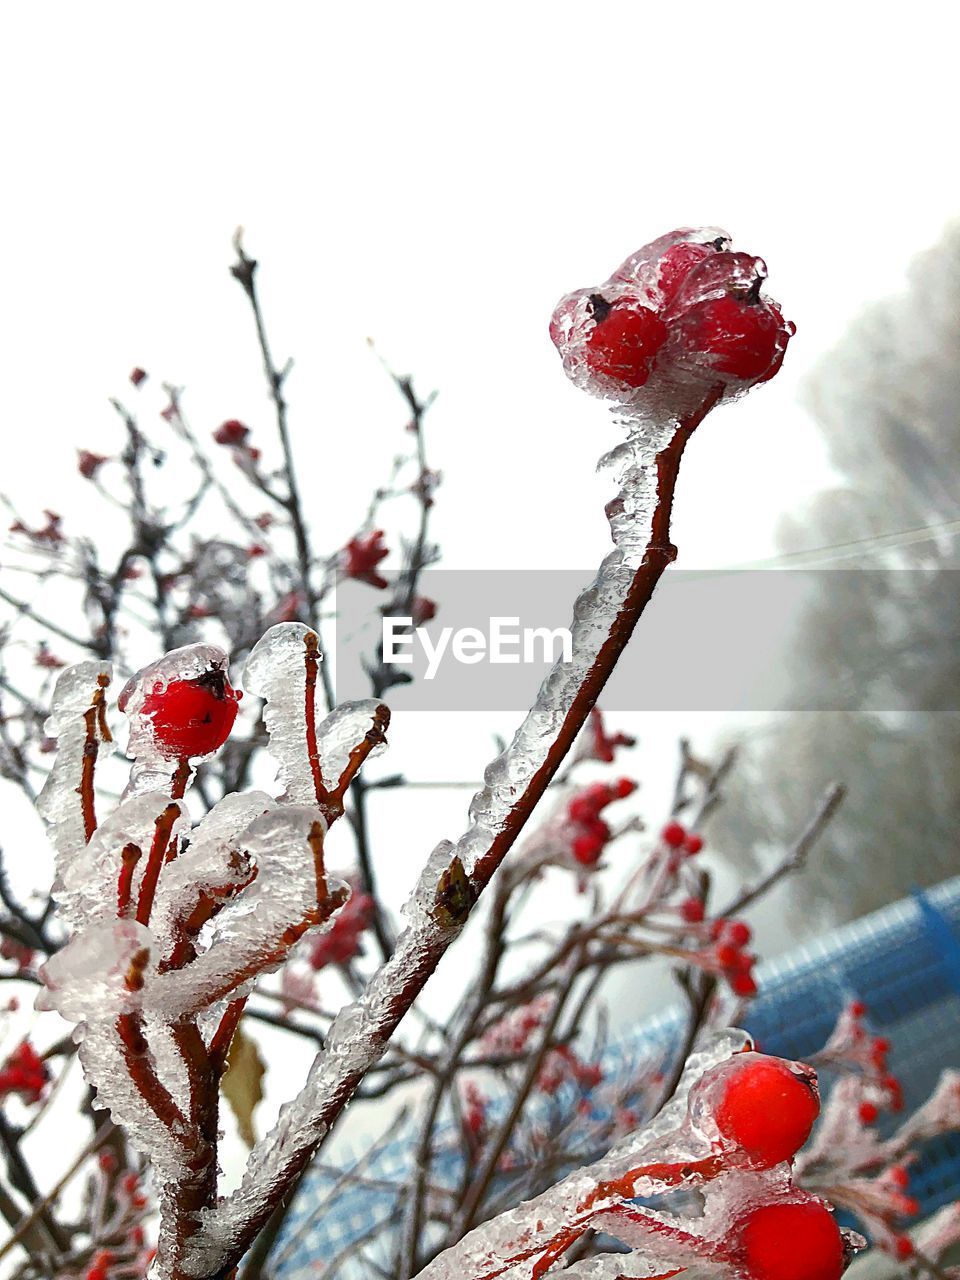 CLOSE-UP OF FROZEN BERRIES ON TREE